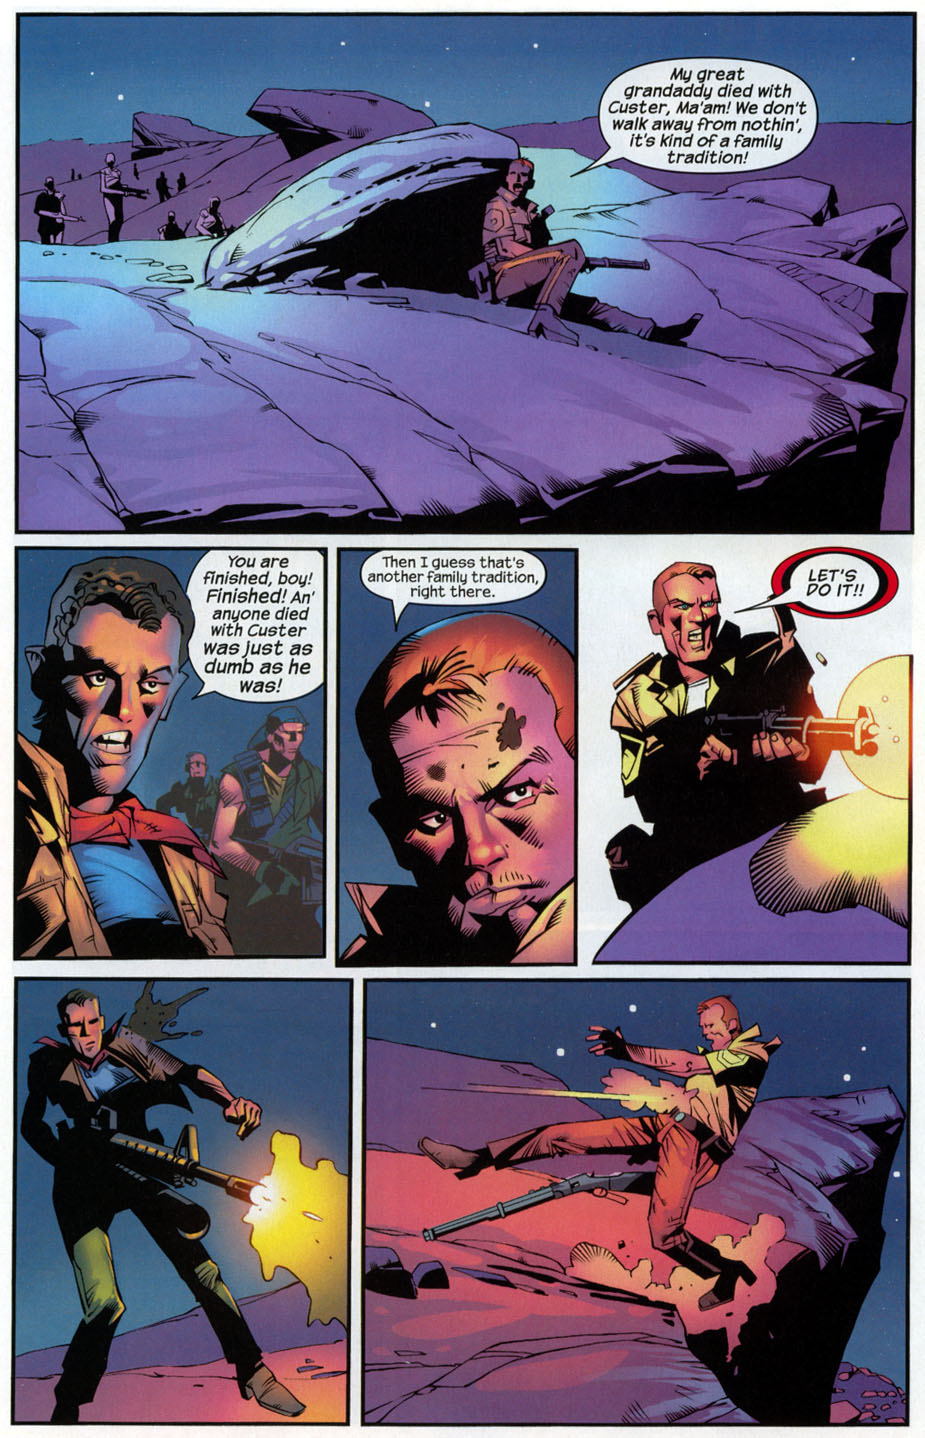 The Punisher (2001) issue 30 - Streets of Laredo #03 - Page 21